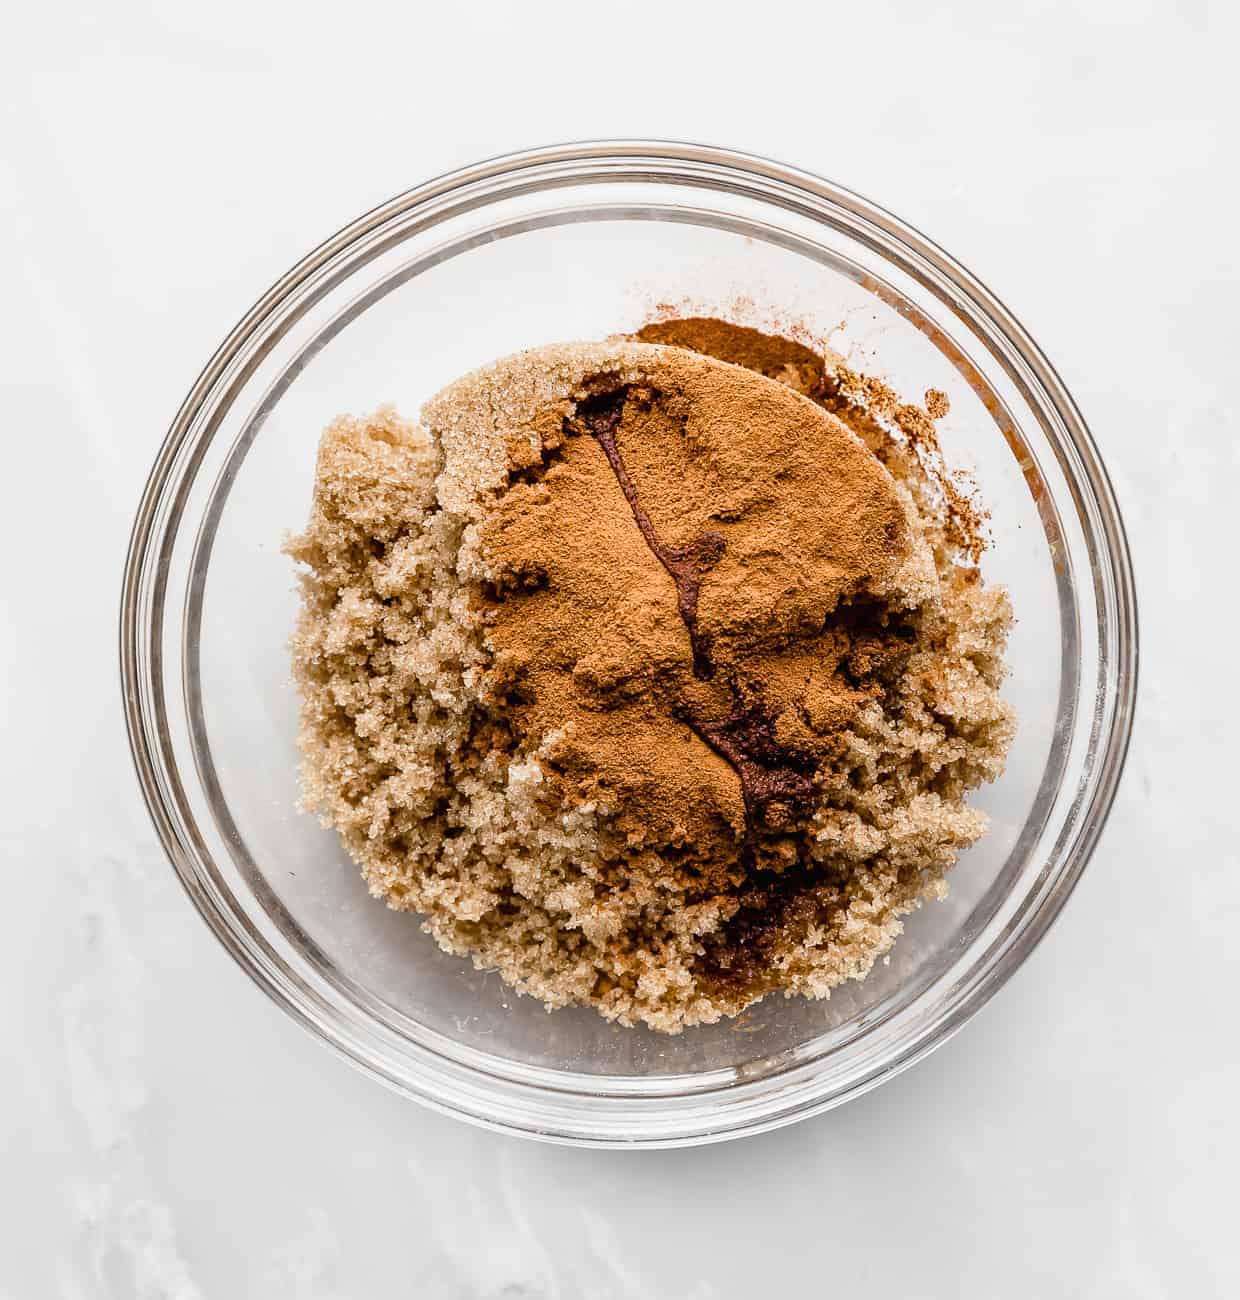 Brown sugar, cinnamon, and extracts in a glass bowl.